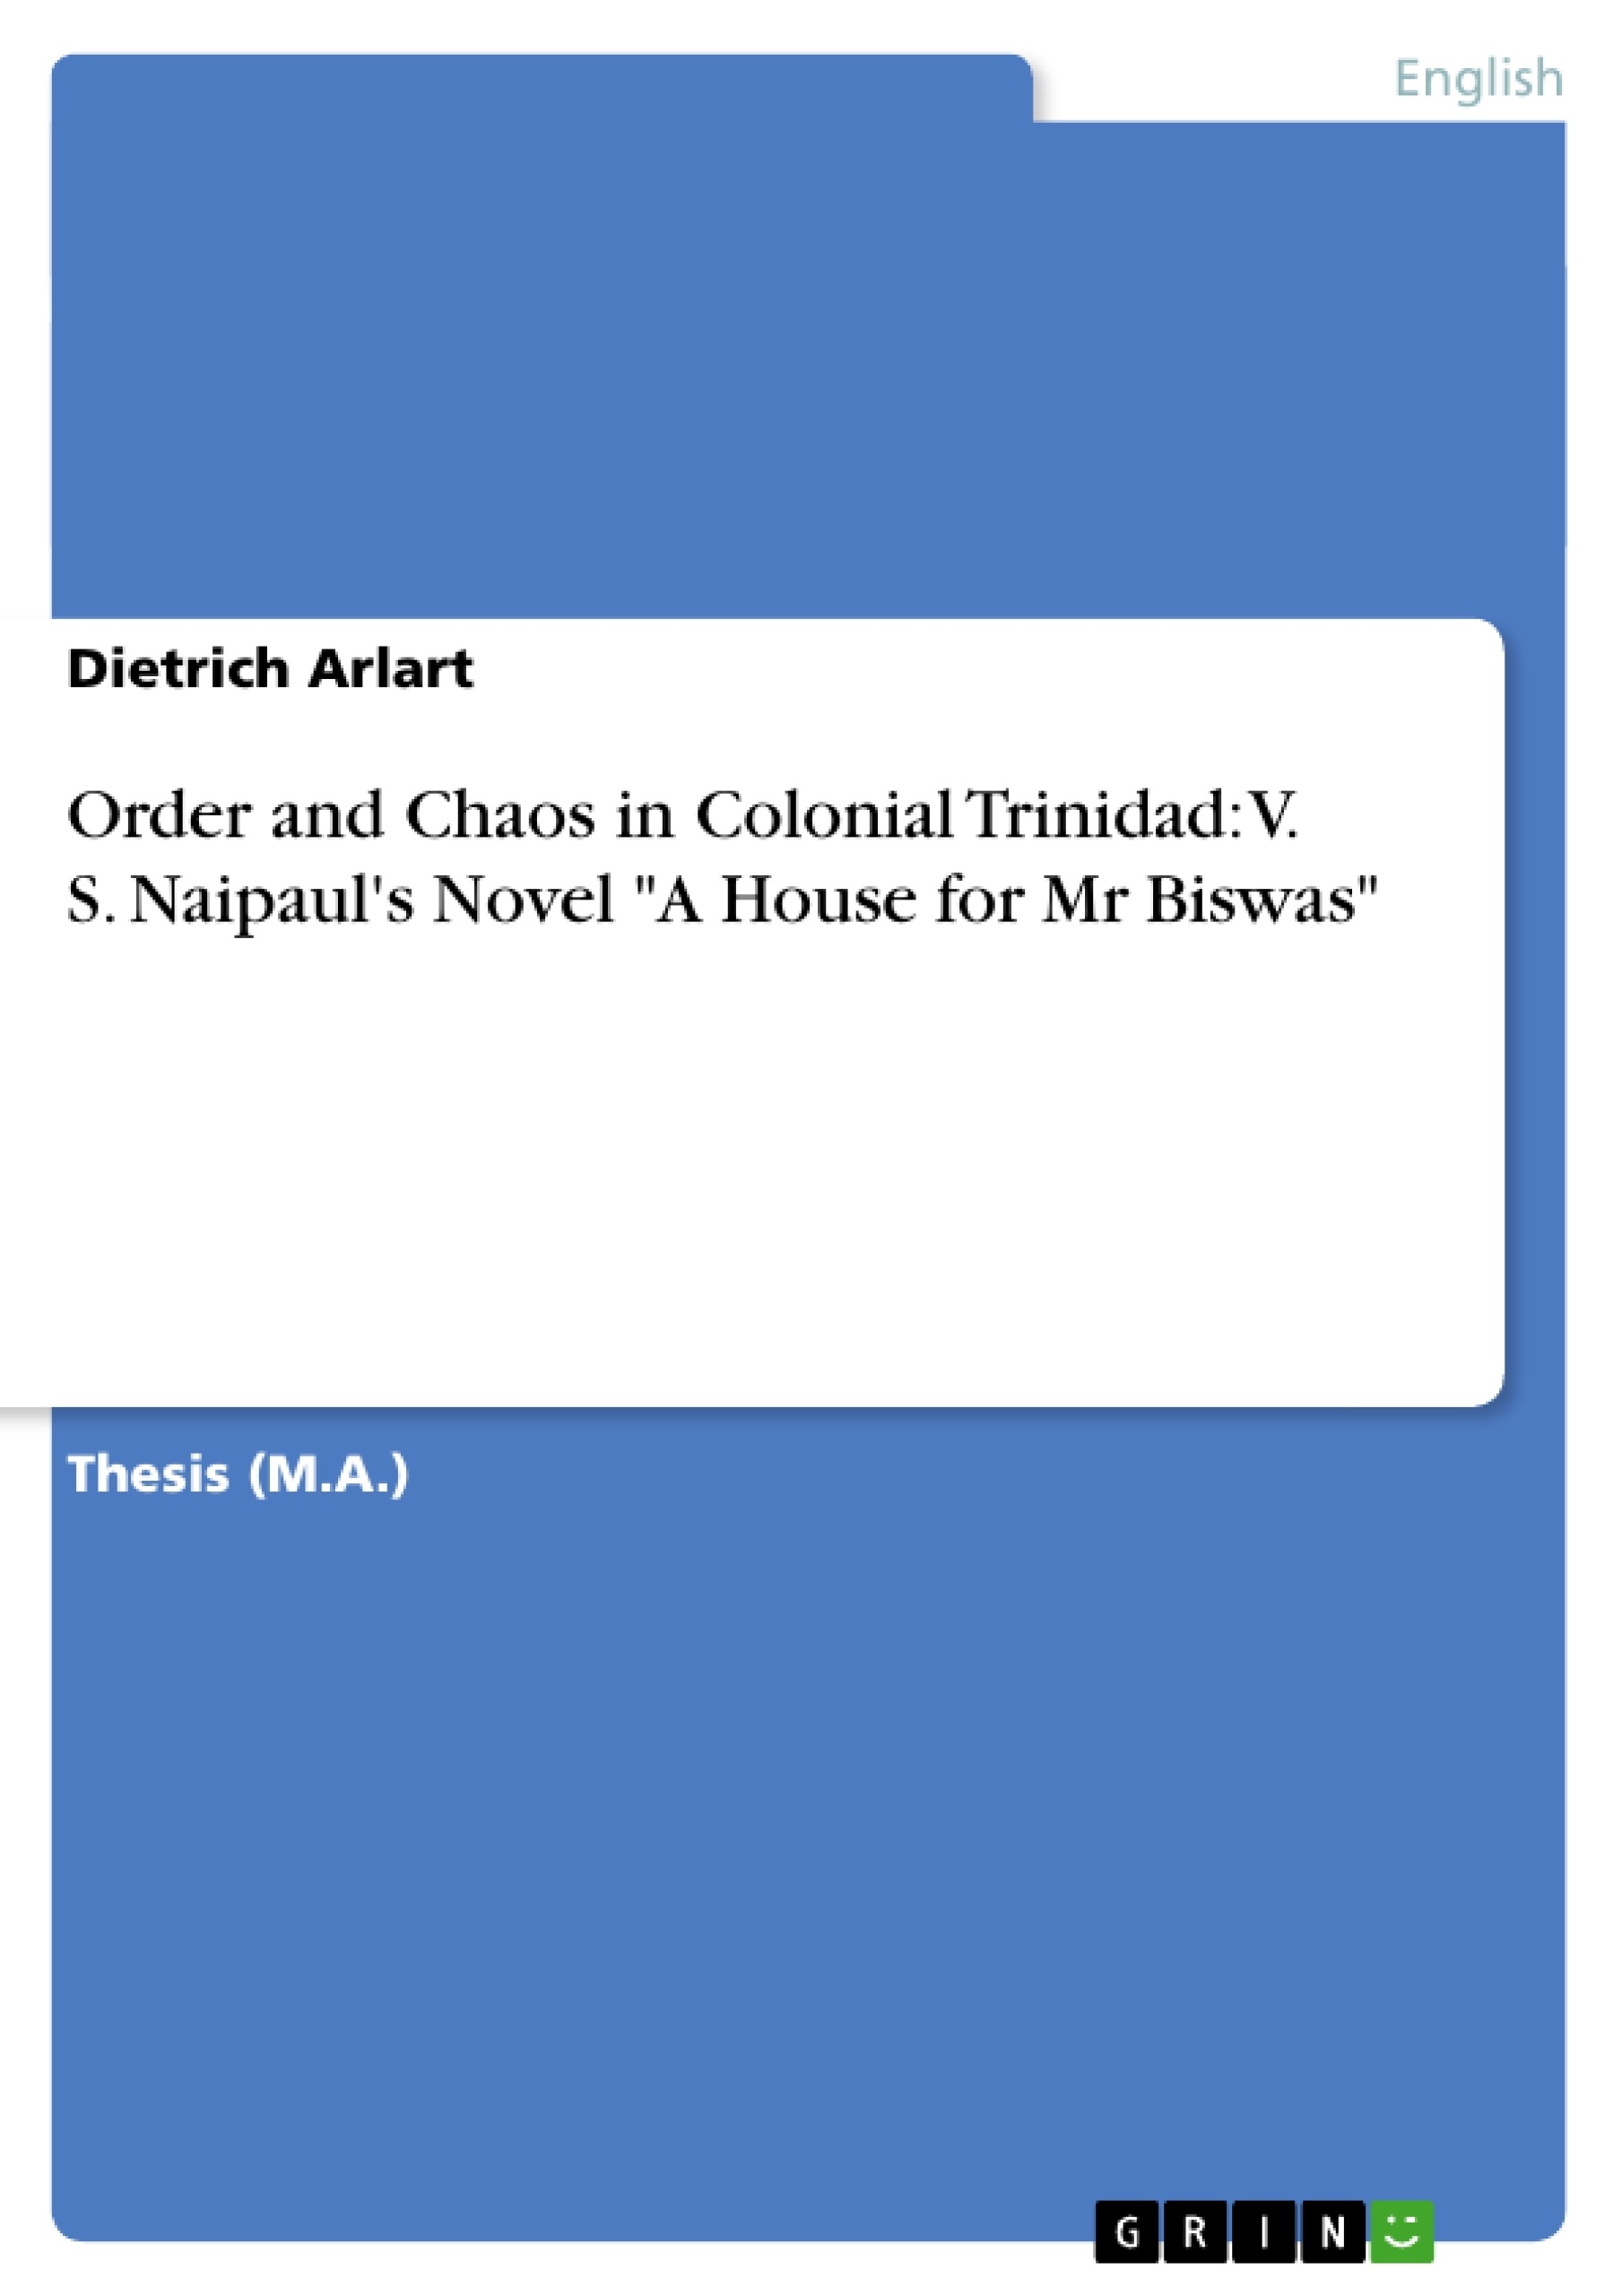 Título: Order and Chaos in Colonial Trinidad: V. S. Naipaul's Novel "A House for Mr Biswas"